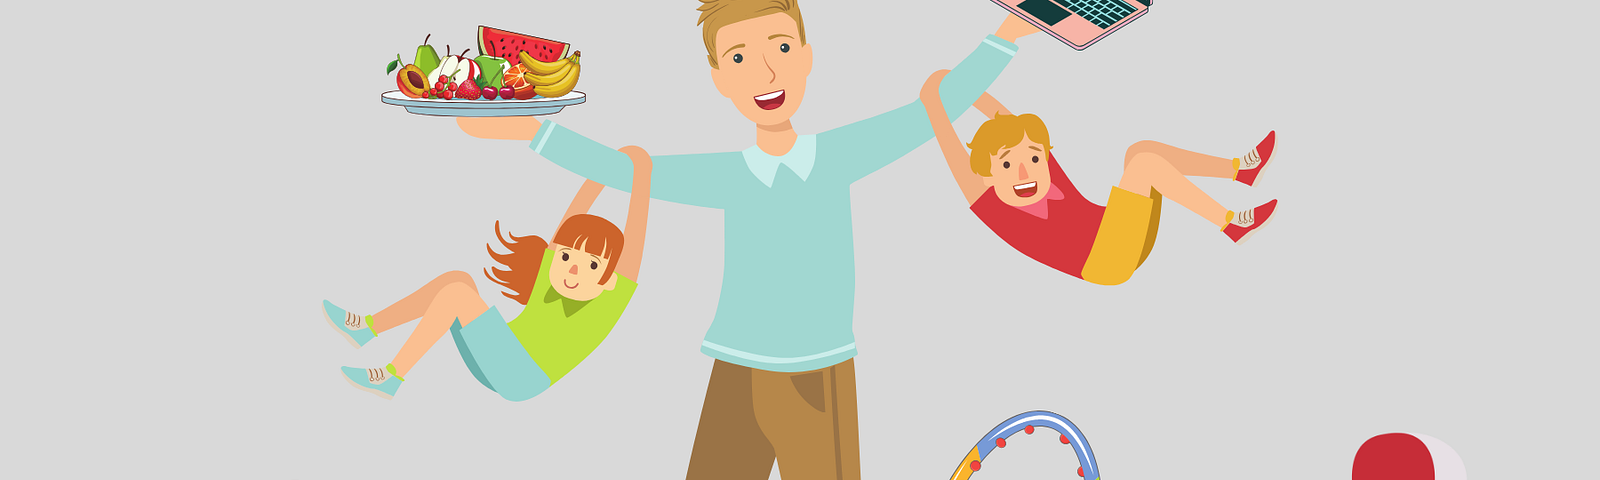 A cartoon illustration of a multitasking parent balancing various activities. The parent is juggling a laptop and a platter of fruits in one hand while holding two children in the other. One child is laughing, another is enjoying the ride, and a third child is in a playpen. The parent also has one leg inside a hula hoop, while another older child sits on the floor using a smartphone.